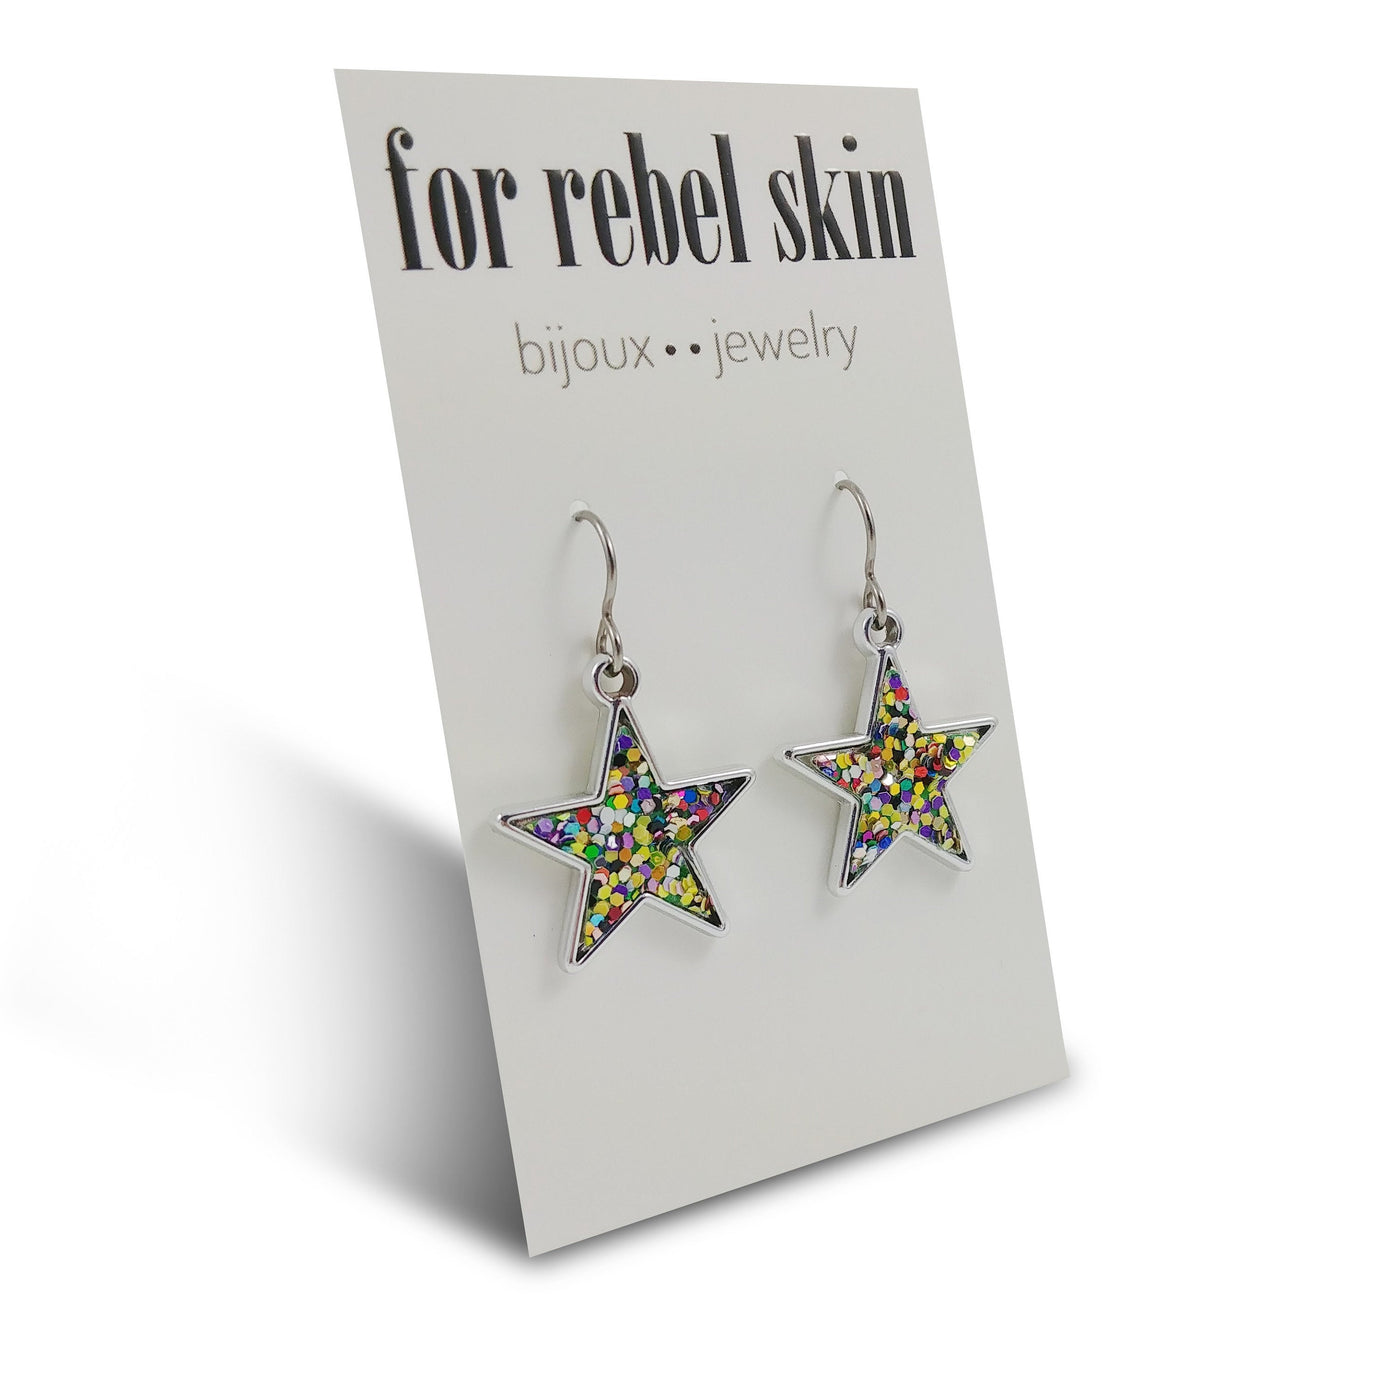 Silver star with glitter, sequins, paillette dangle earrings - Hypoallergenic pure titanium and acrylic